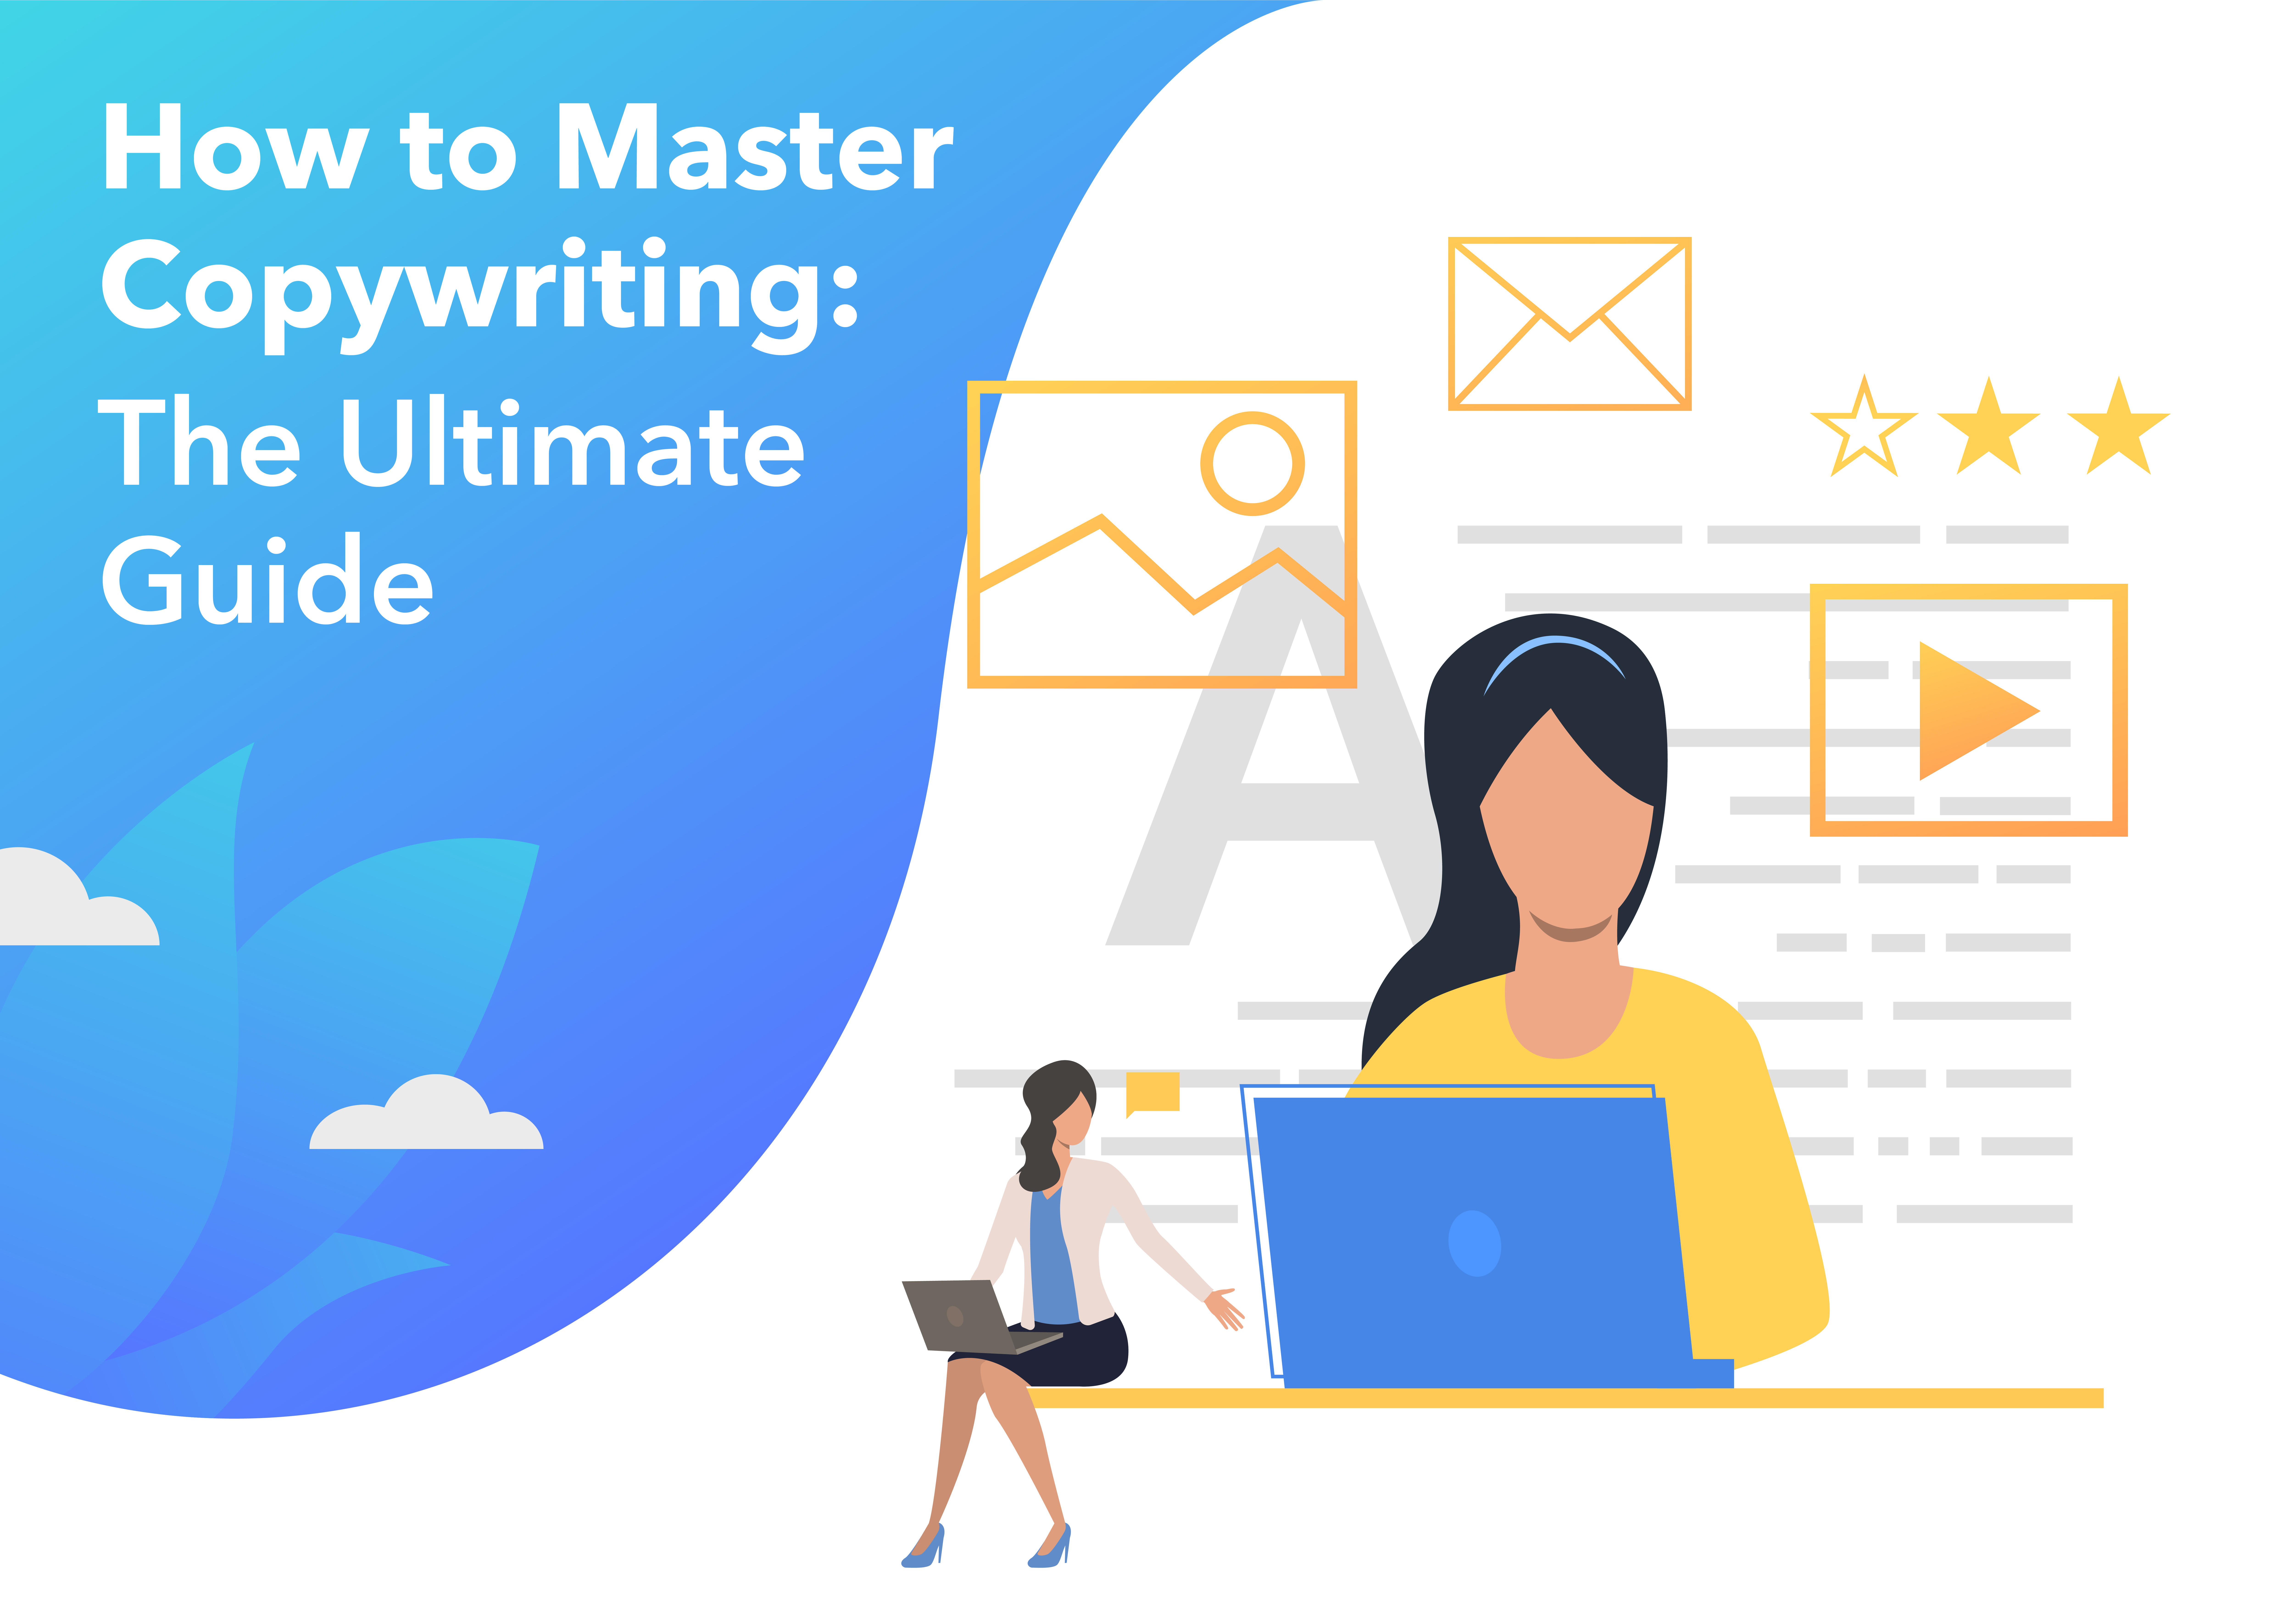 How to Master Copywriting: The Ultimate Guide